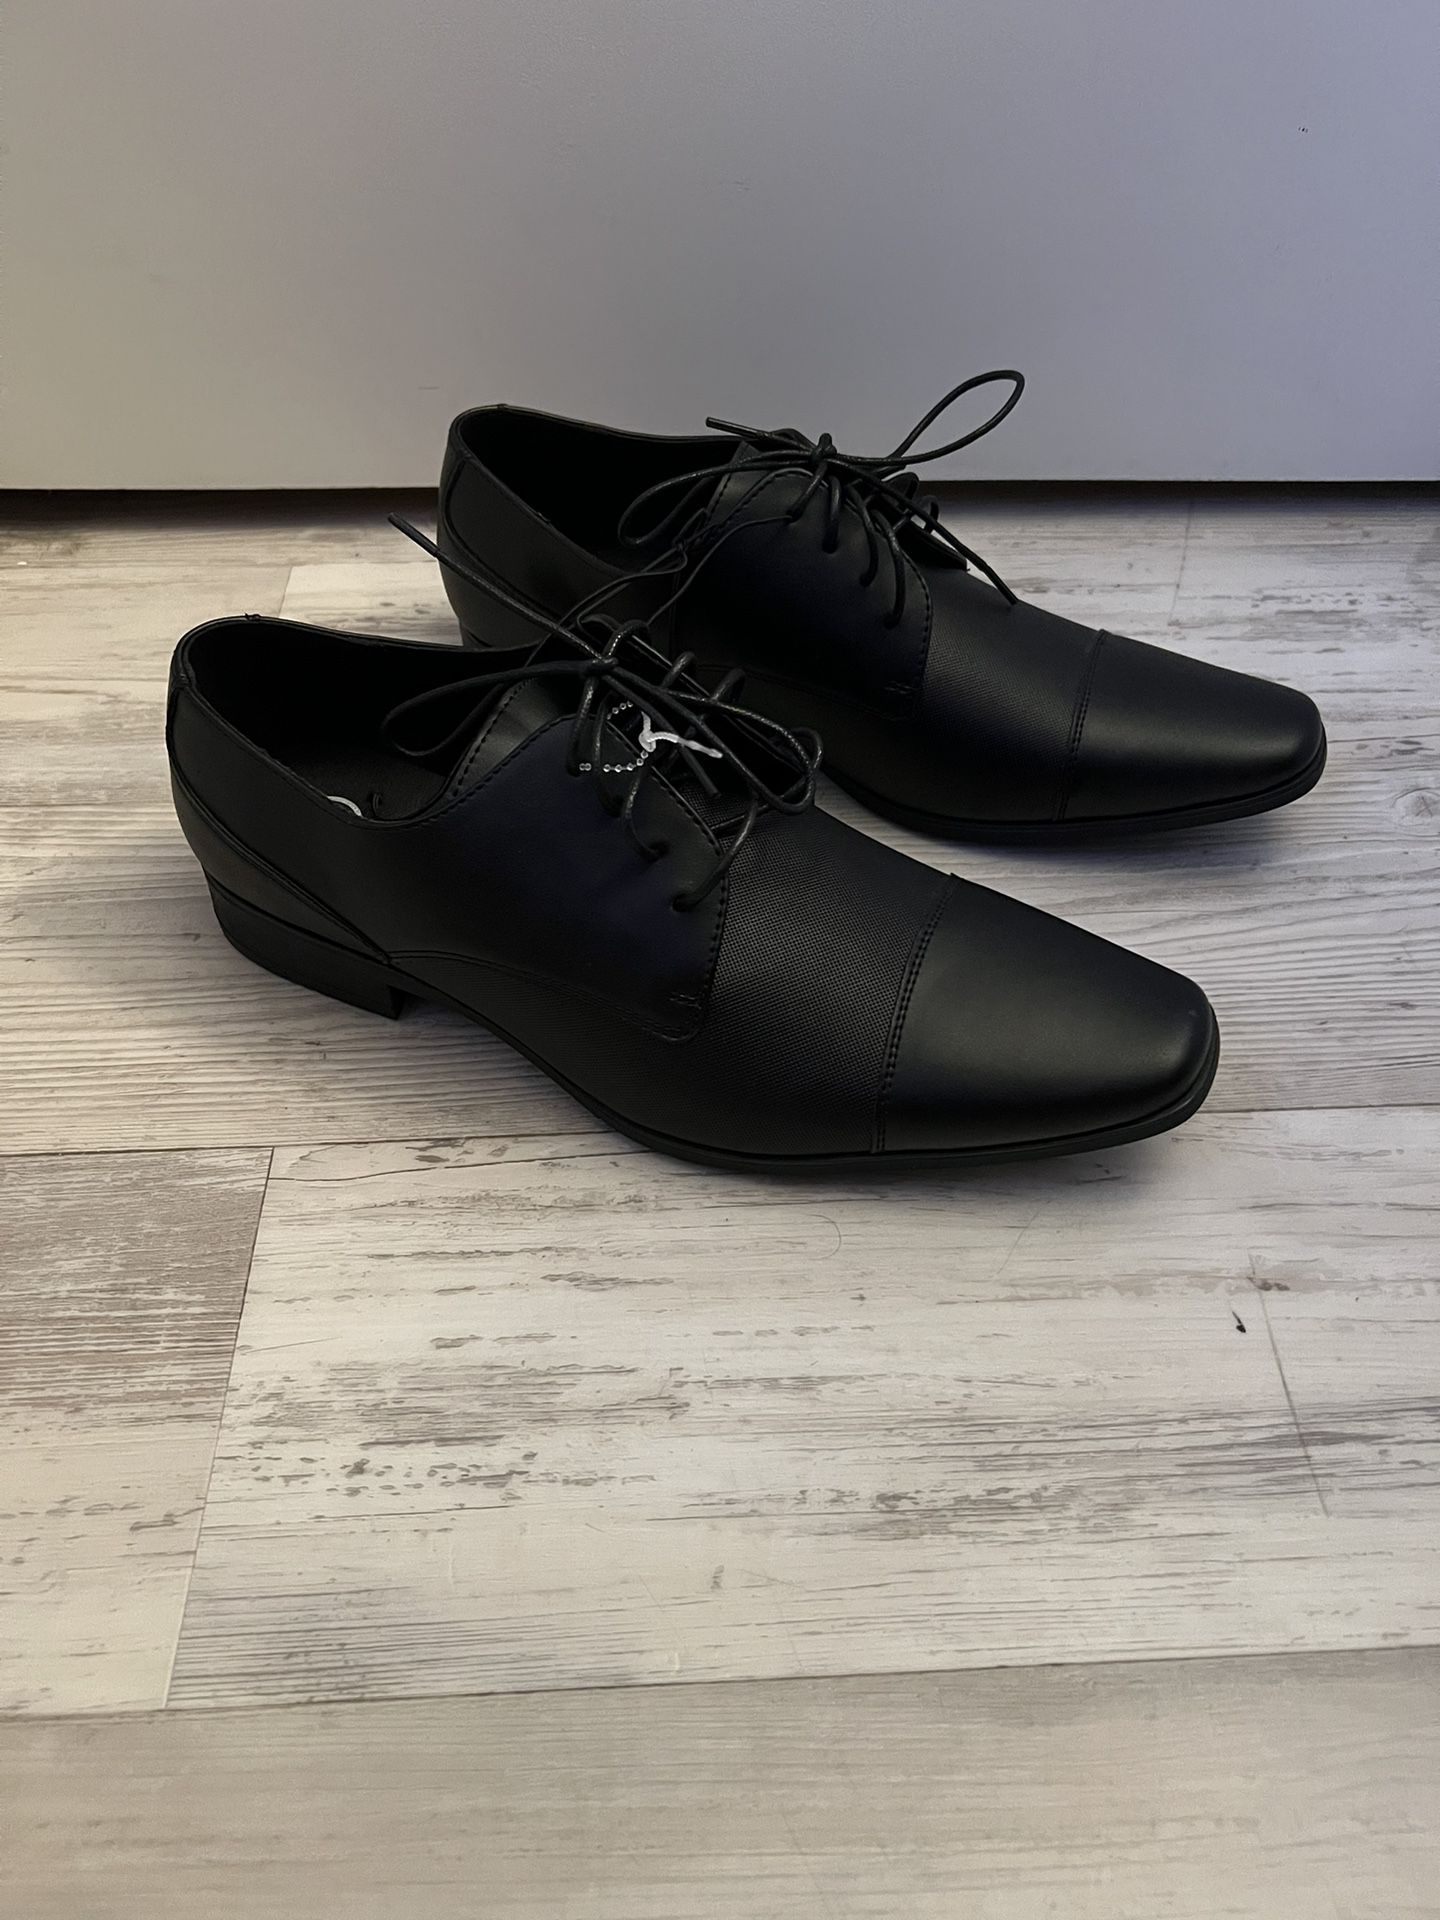 New Men's Dress Shoes (Calvin Klein) Size 12 for Sale in Phillips Ranch, CA - OfferUp